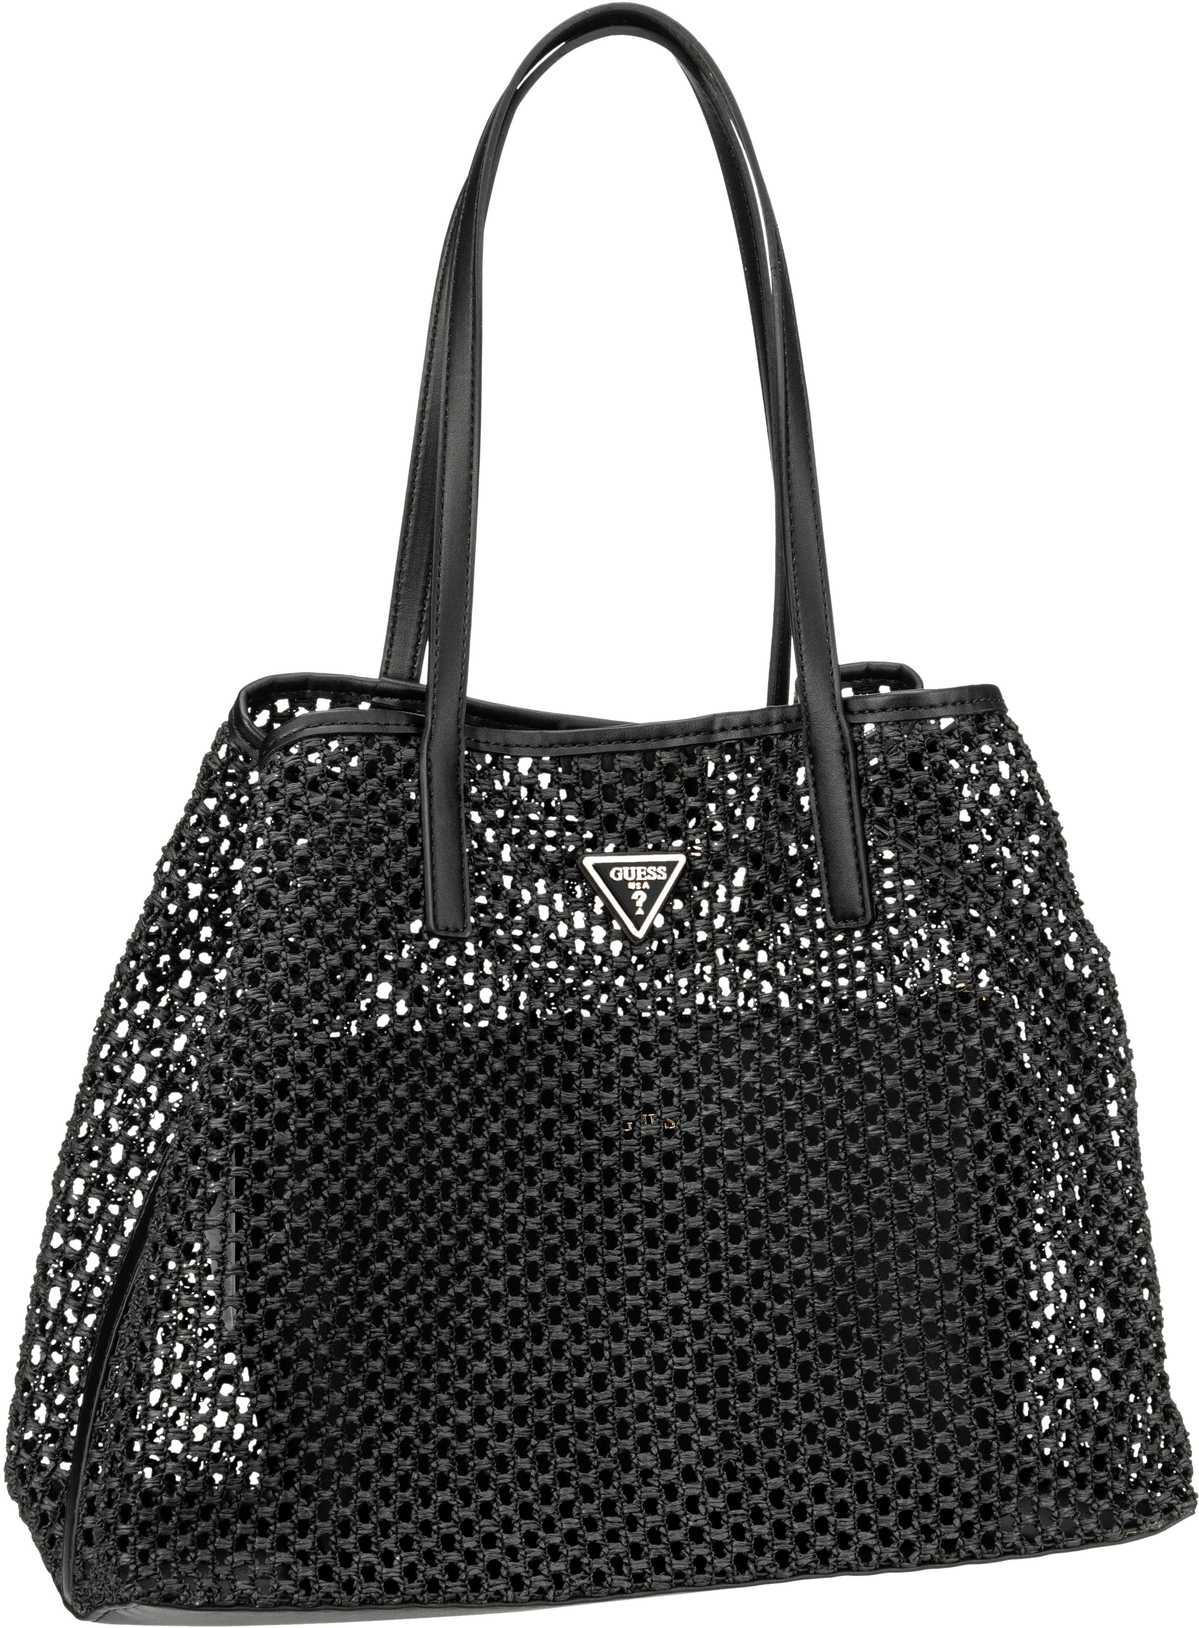 Guess Vikky Tote Straw - Black